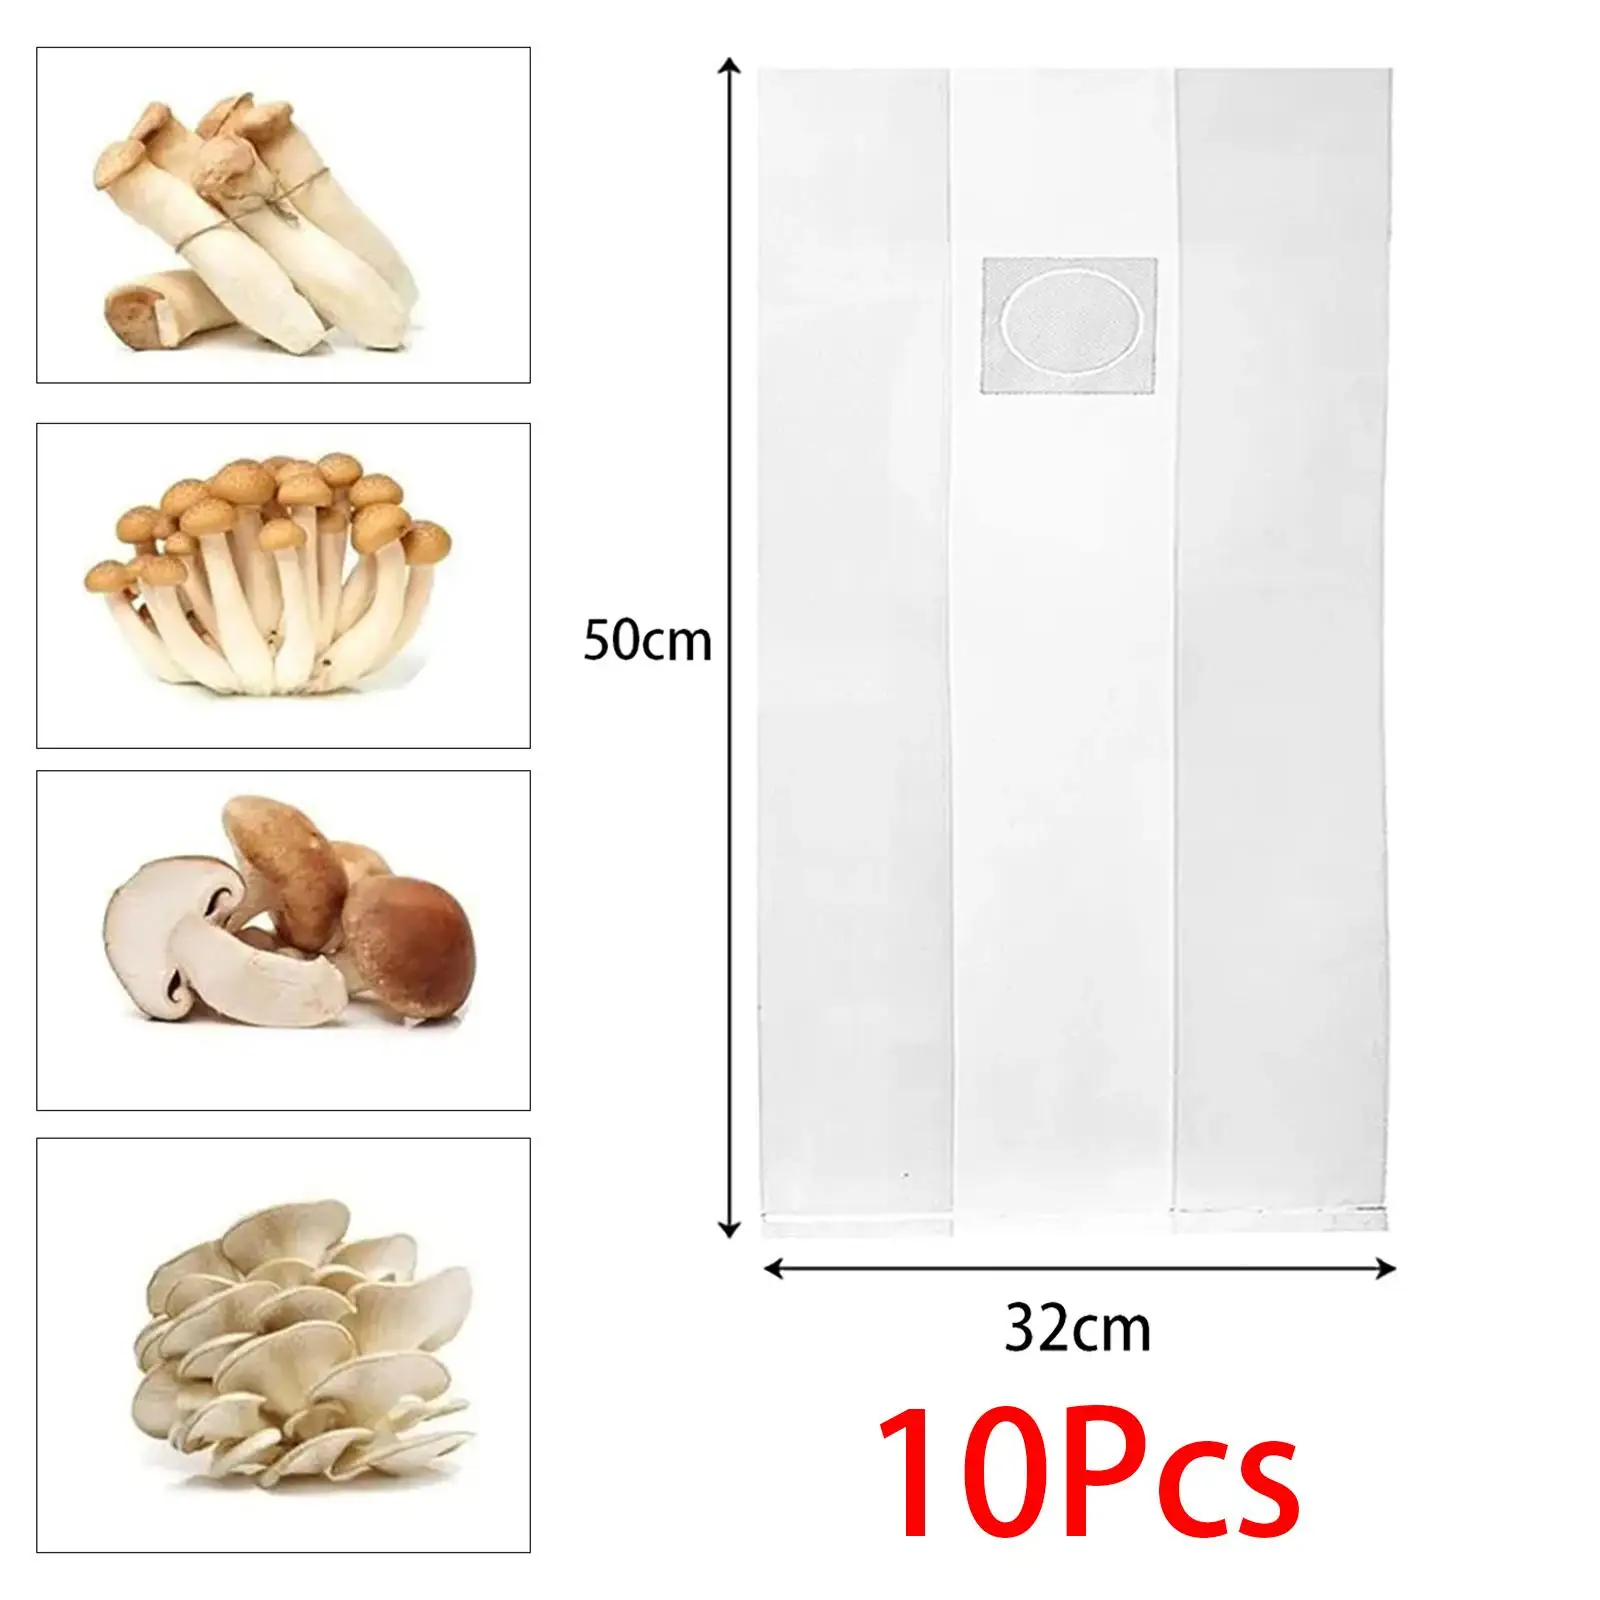 20x Spawning Bags Edible Fungi Growing Bags Large Tear Resistant Strong Extra